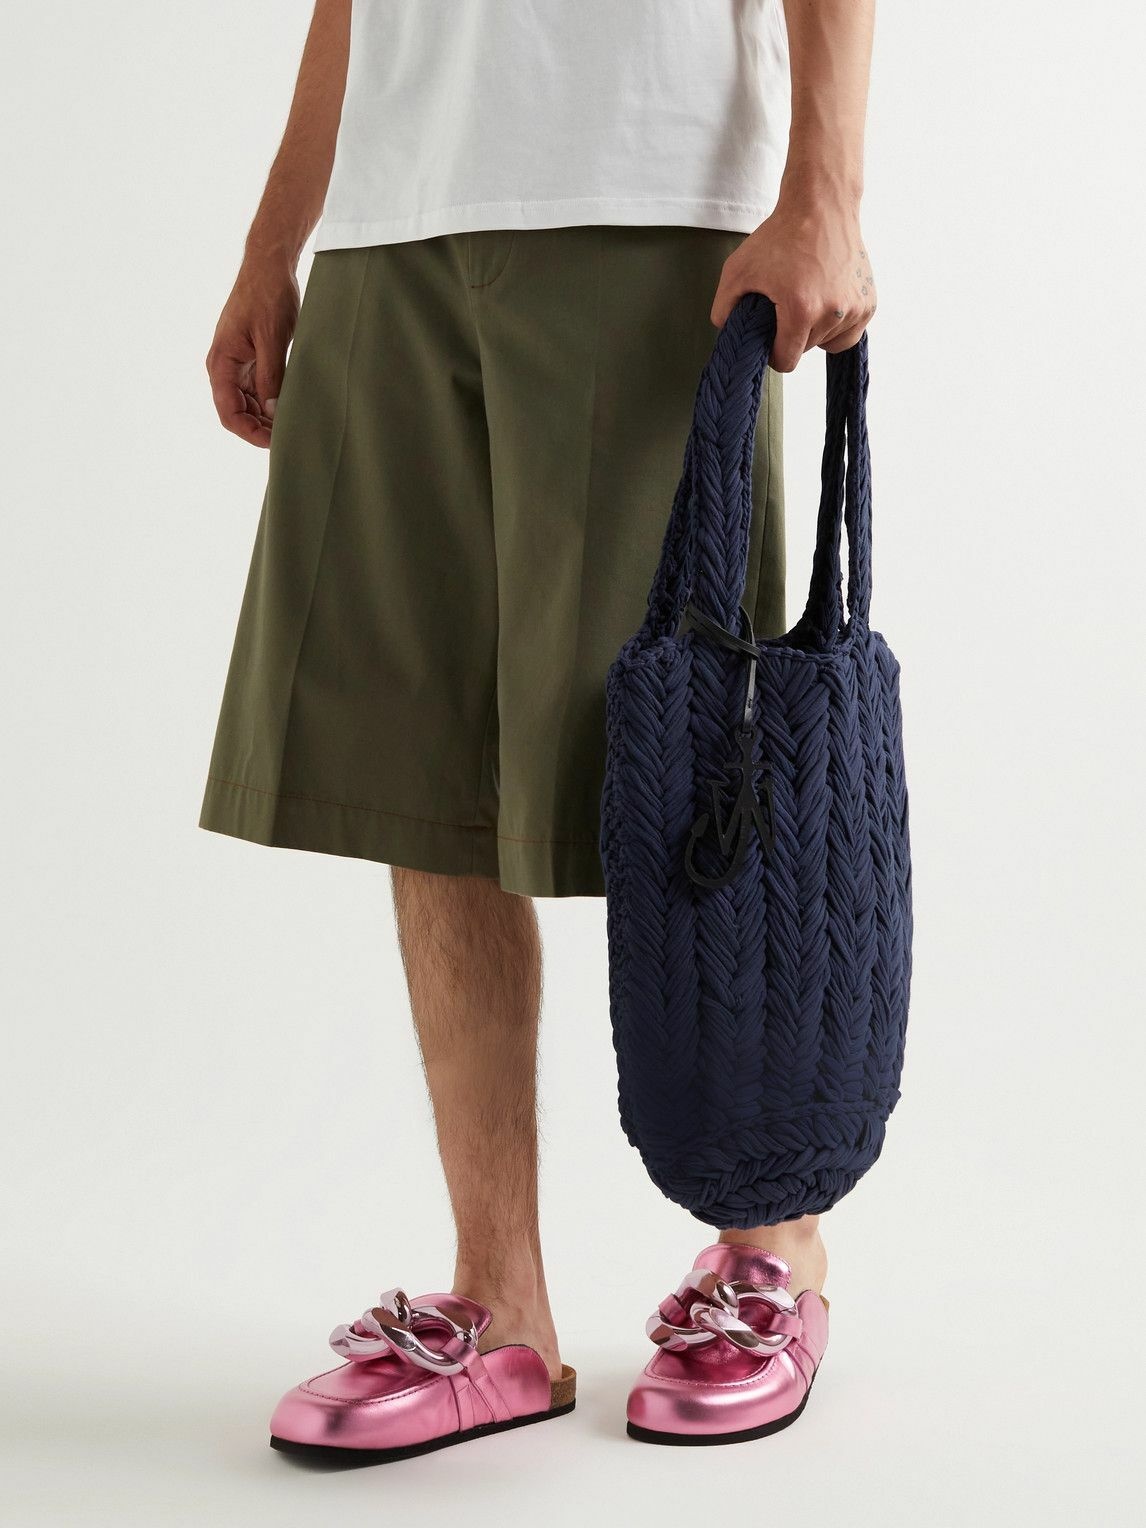 JW Anderson - Reversible Leather-Trimmed Crocheted Cotton Tote Bag JW ...